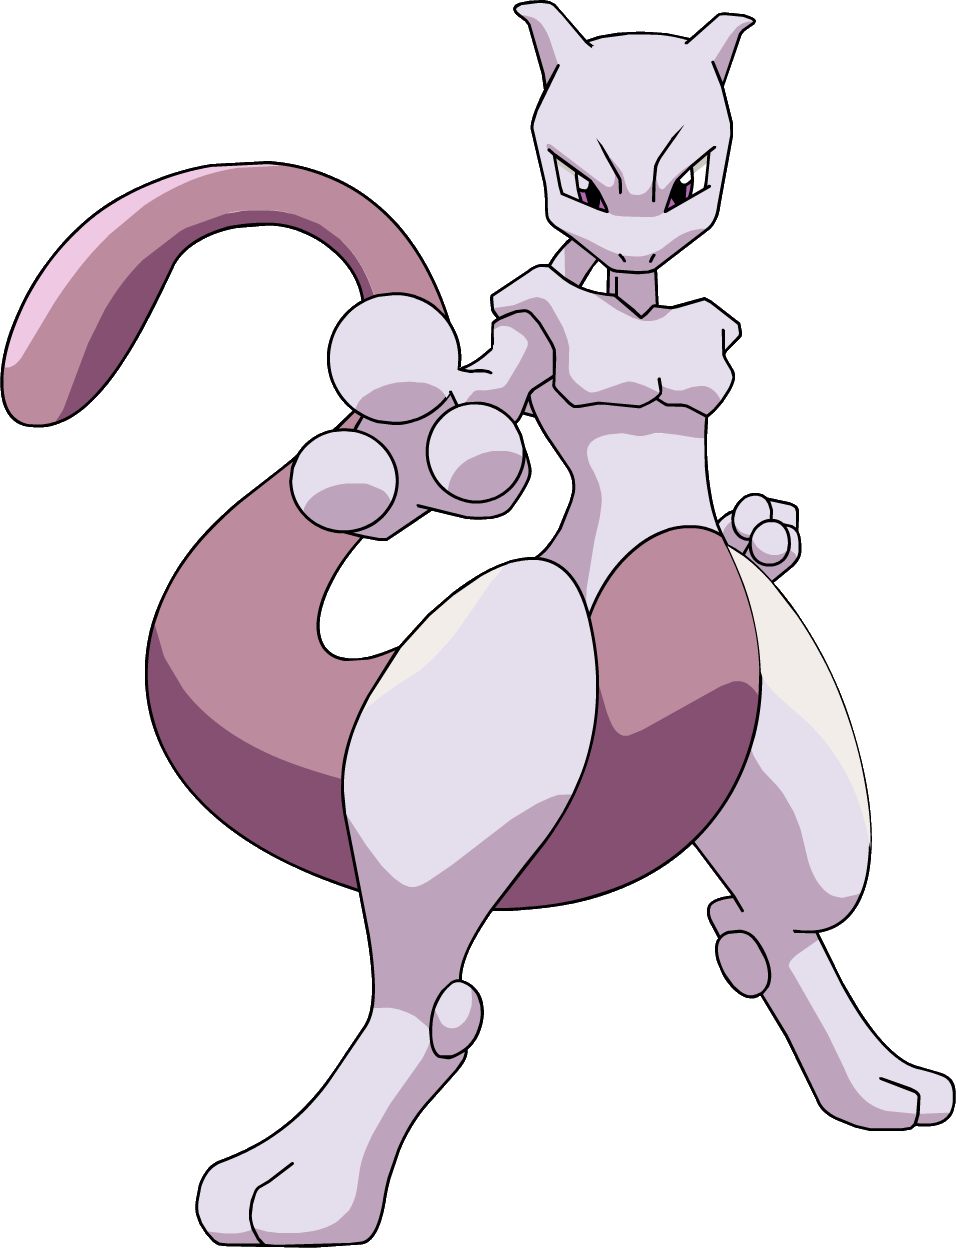 https://img3.wikia.nocookie.net/__cb20140213043209/pokemon/images/a/a0/150Mewtwo_AG_anime_2.png